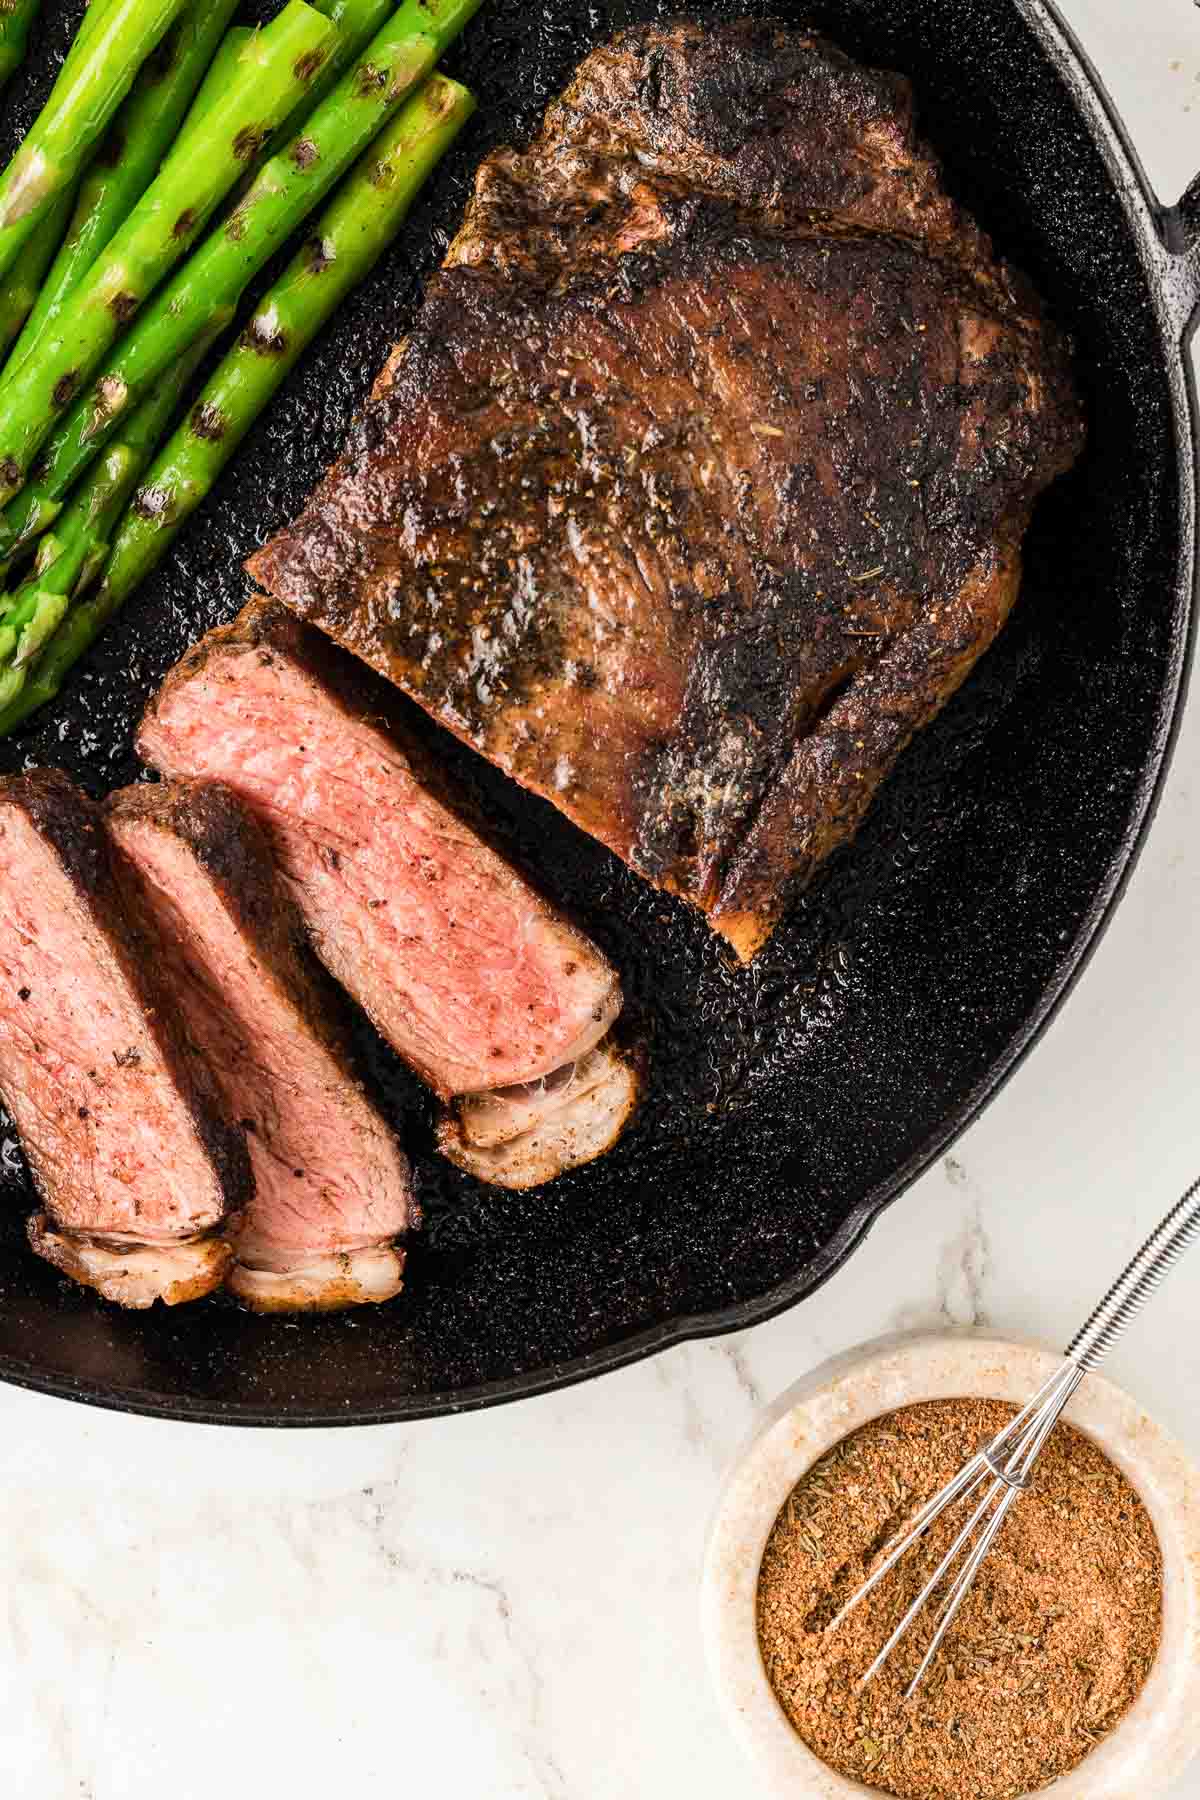 Blackened steak sliced and asparagus in a cast iron skillet.